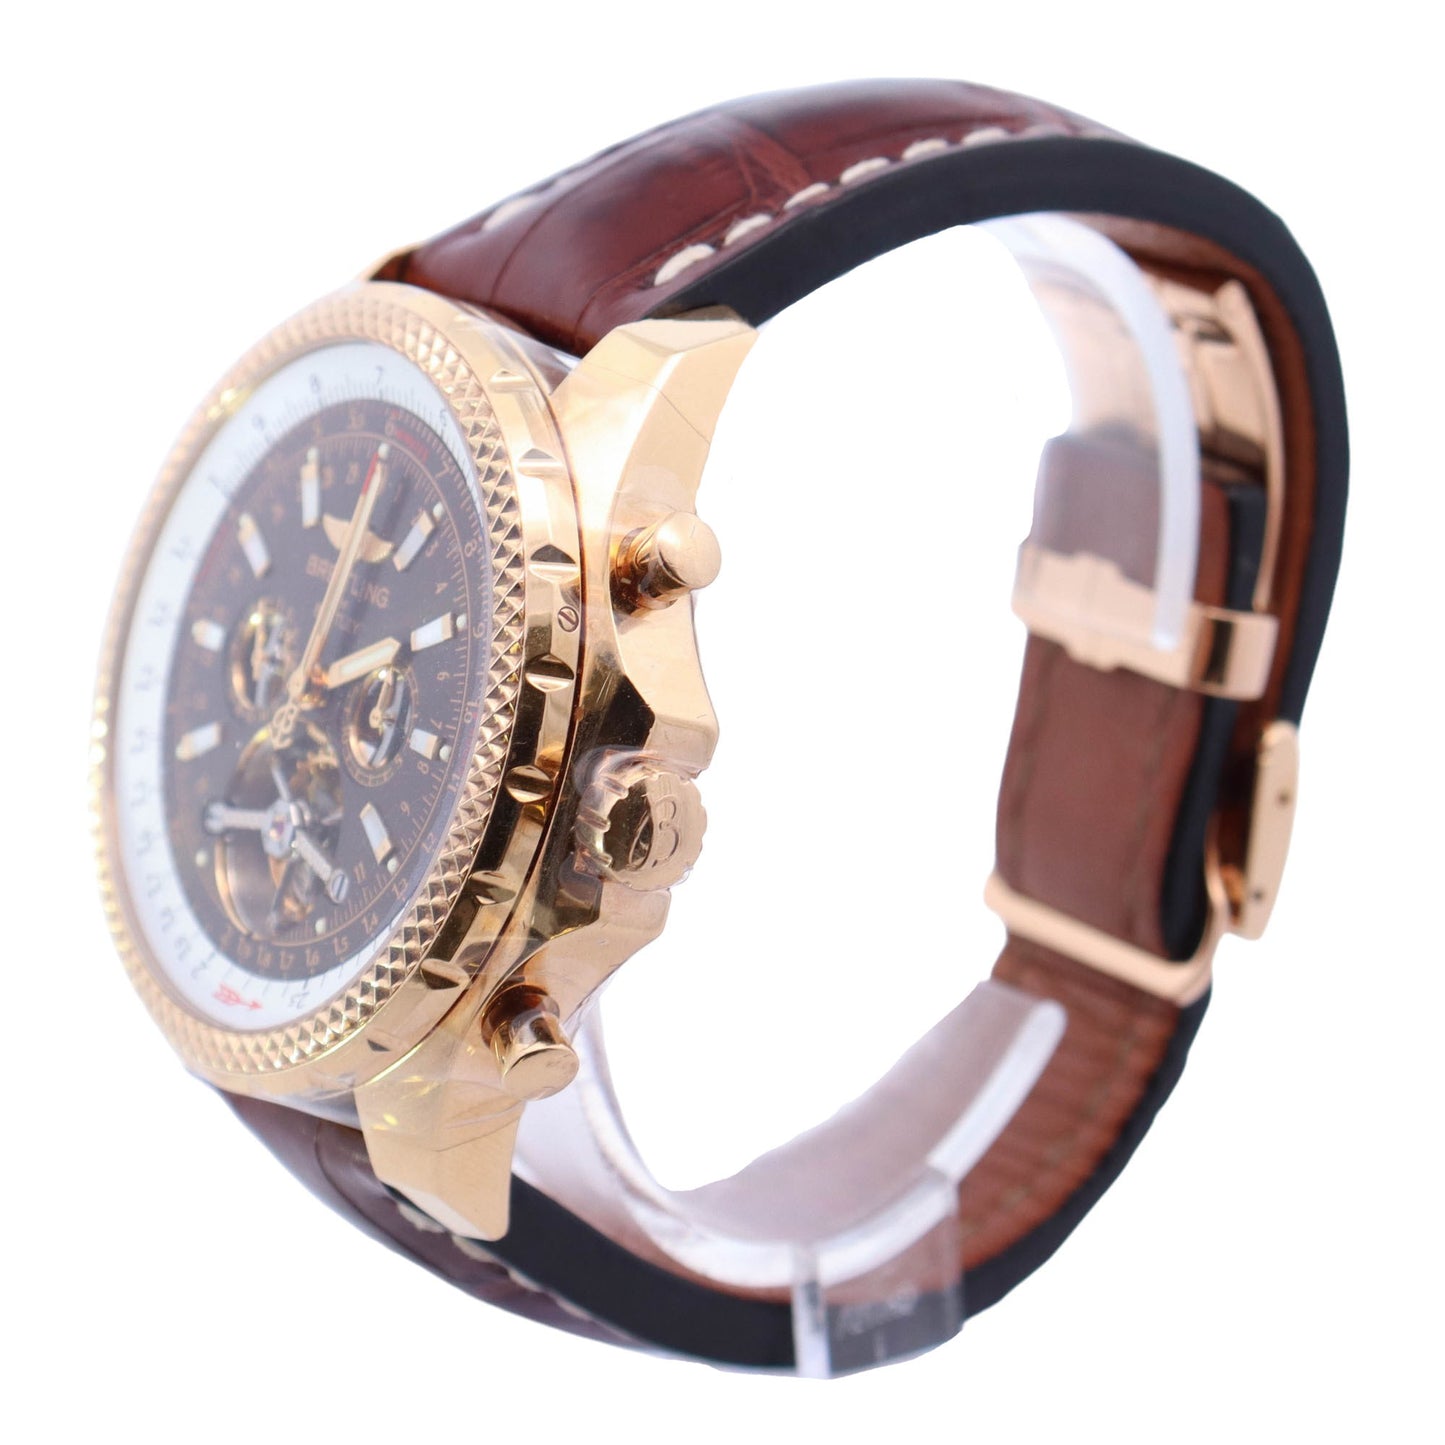 Breitling Mulliner Toubillon 46mm Yellow Gold Brown Tourbillon Dial Watch - Happy Jewelers Fine Jewelry Lifetime Warranty